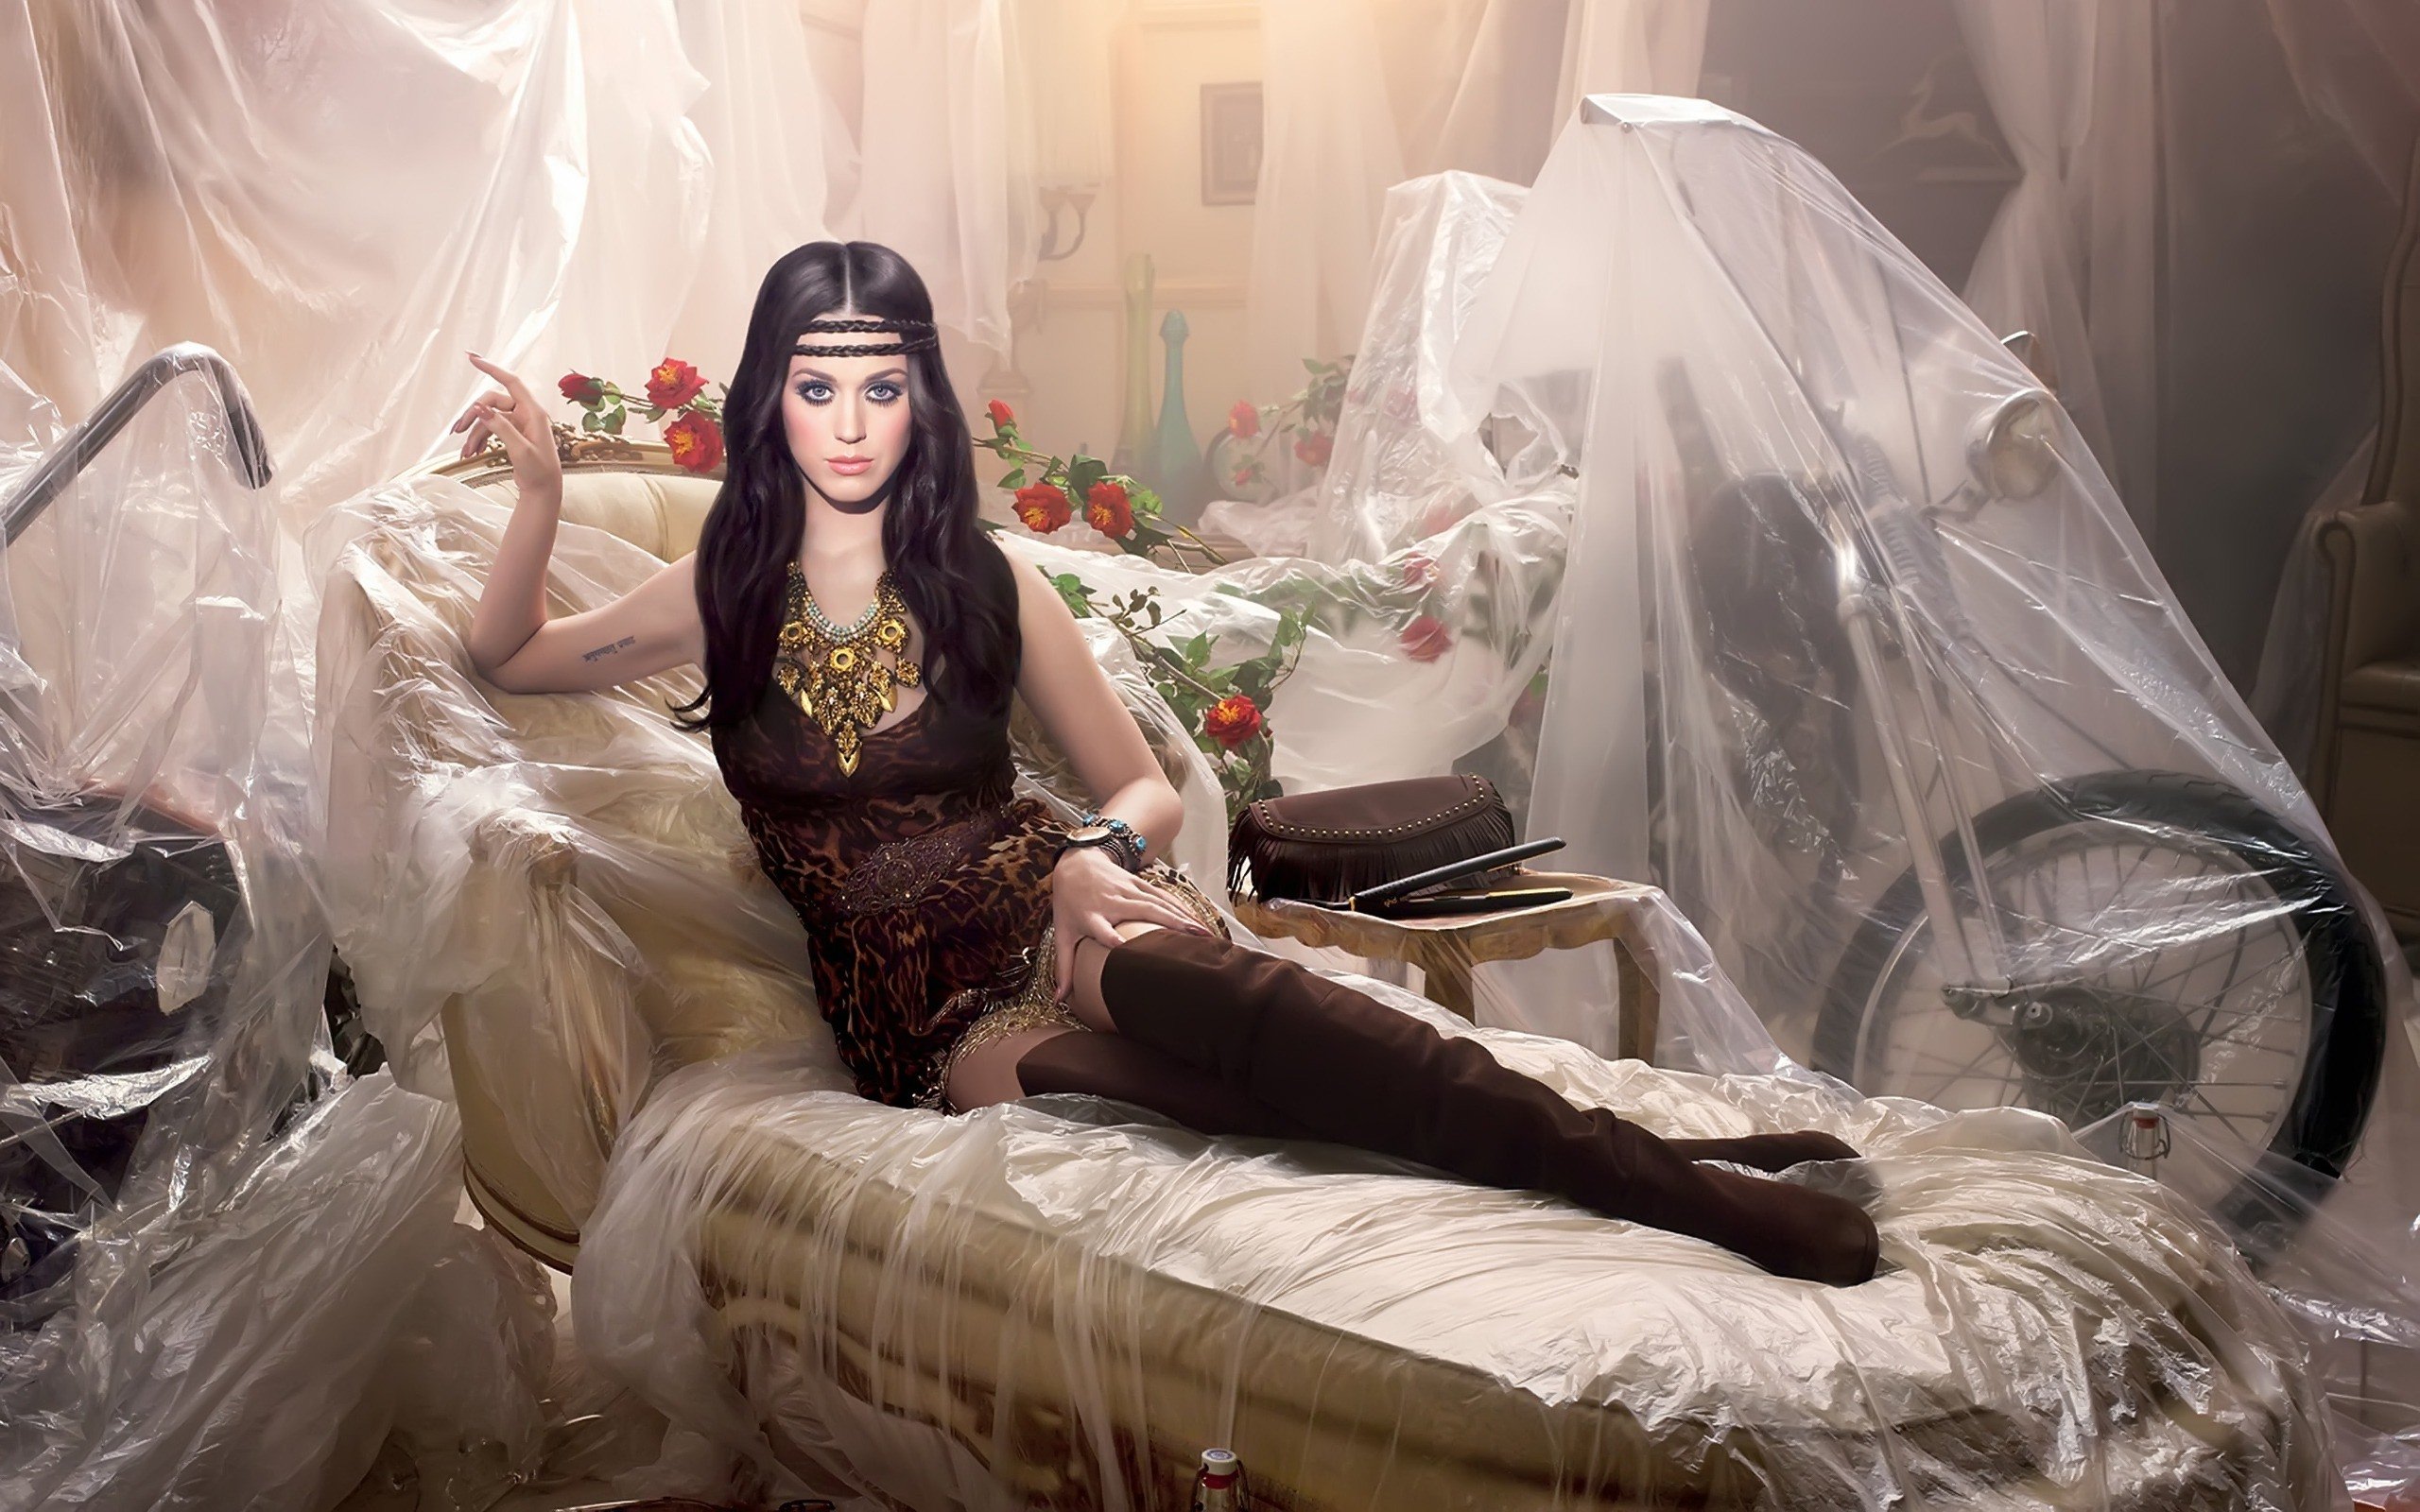 Katy Perry in a music-themed desktop wallpaper.